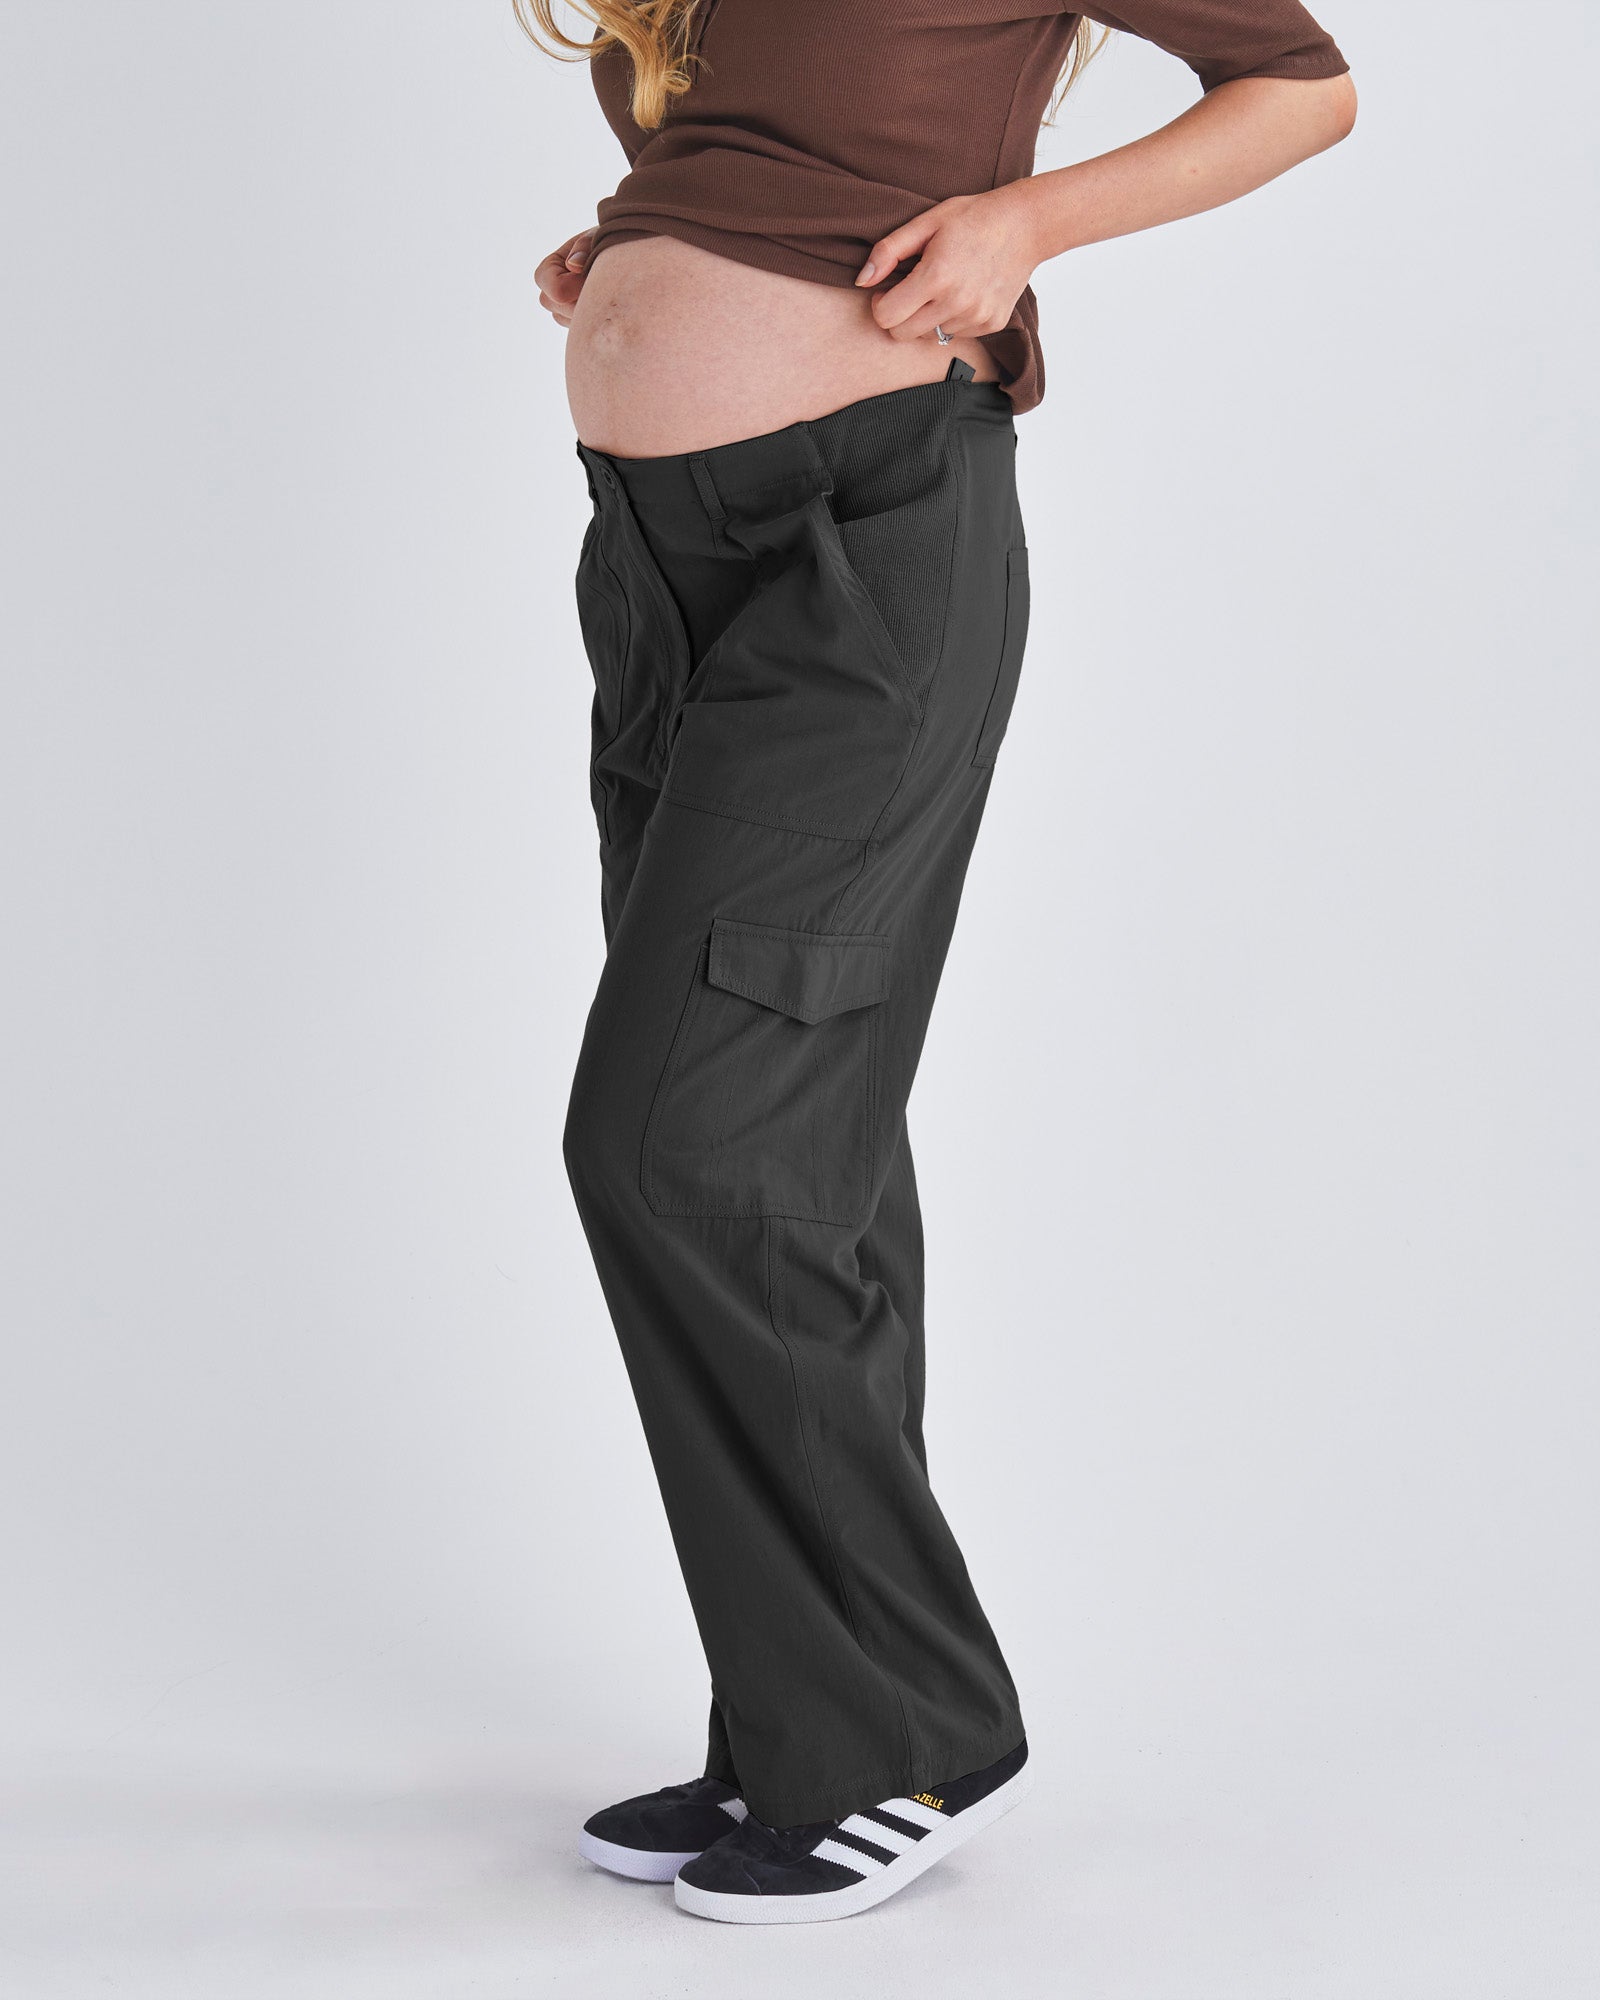 Black Maternity Cotton Cargo Pants from Angel Maternity